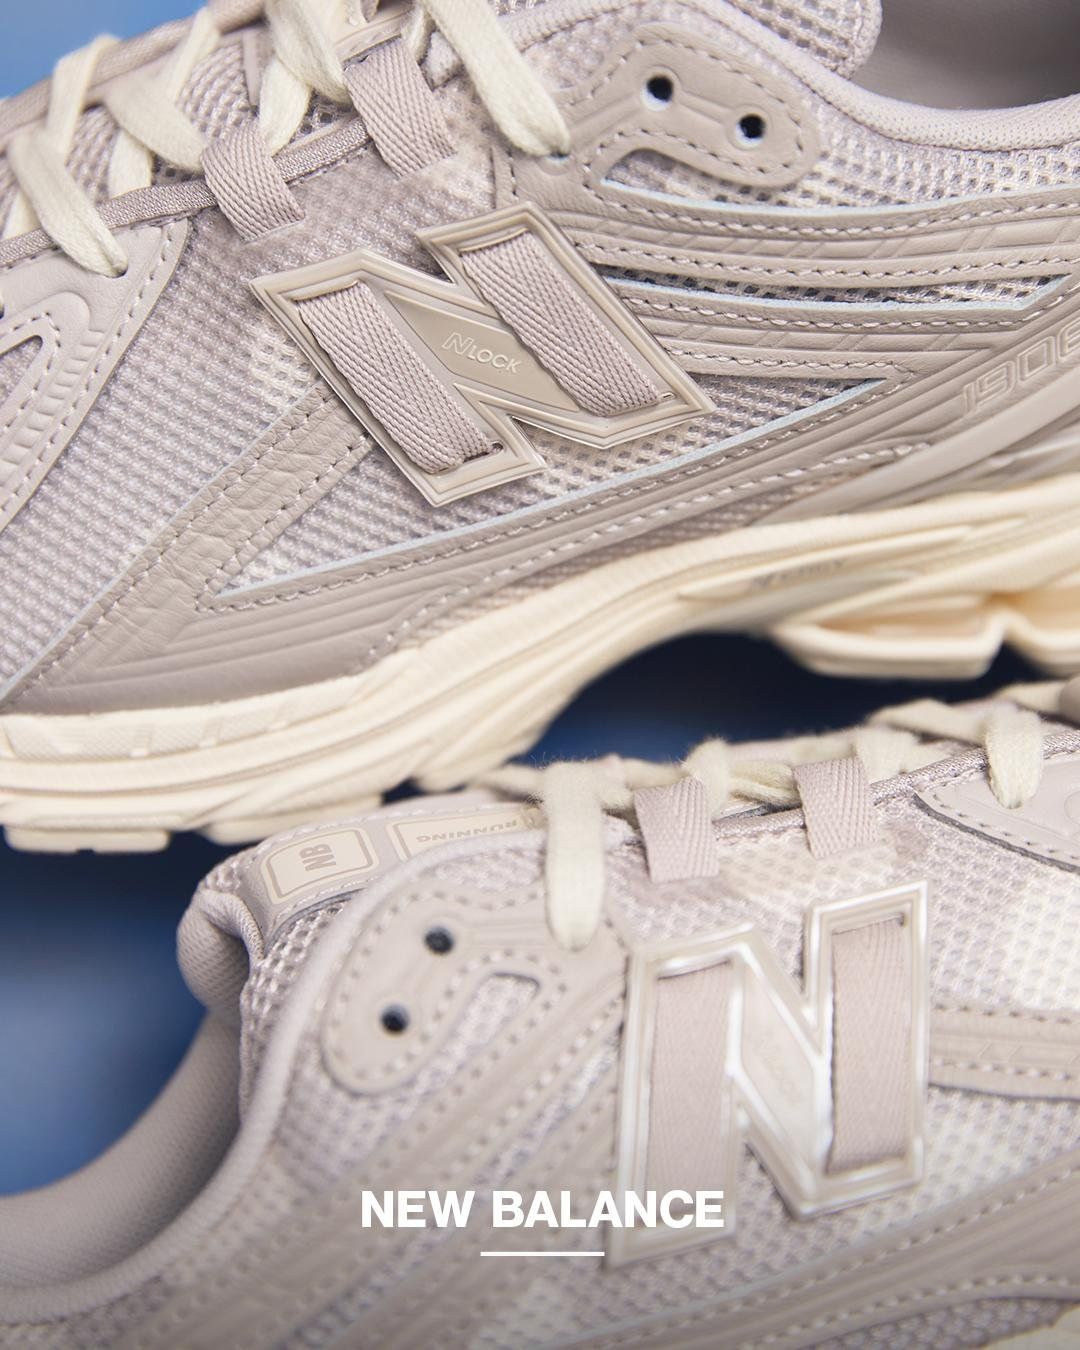 Bryant Giles and New Balance Debut a 2002R and Artists Shoe